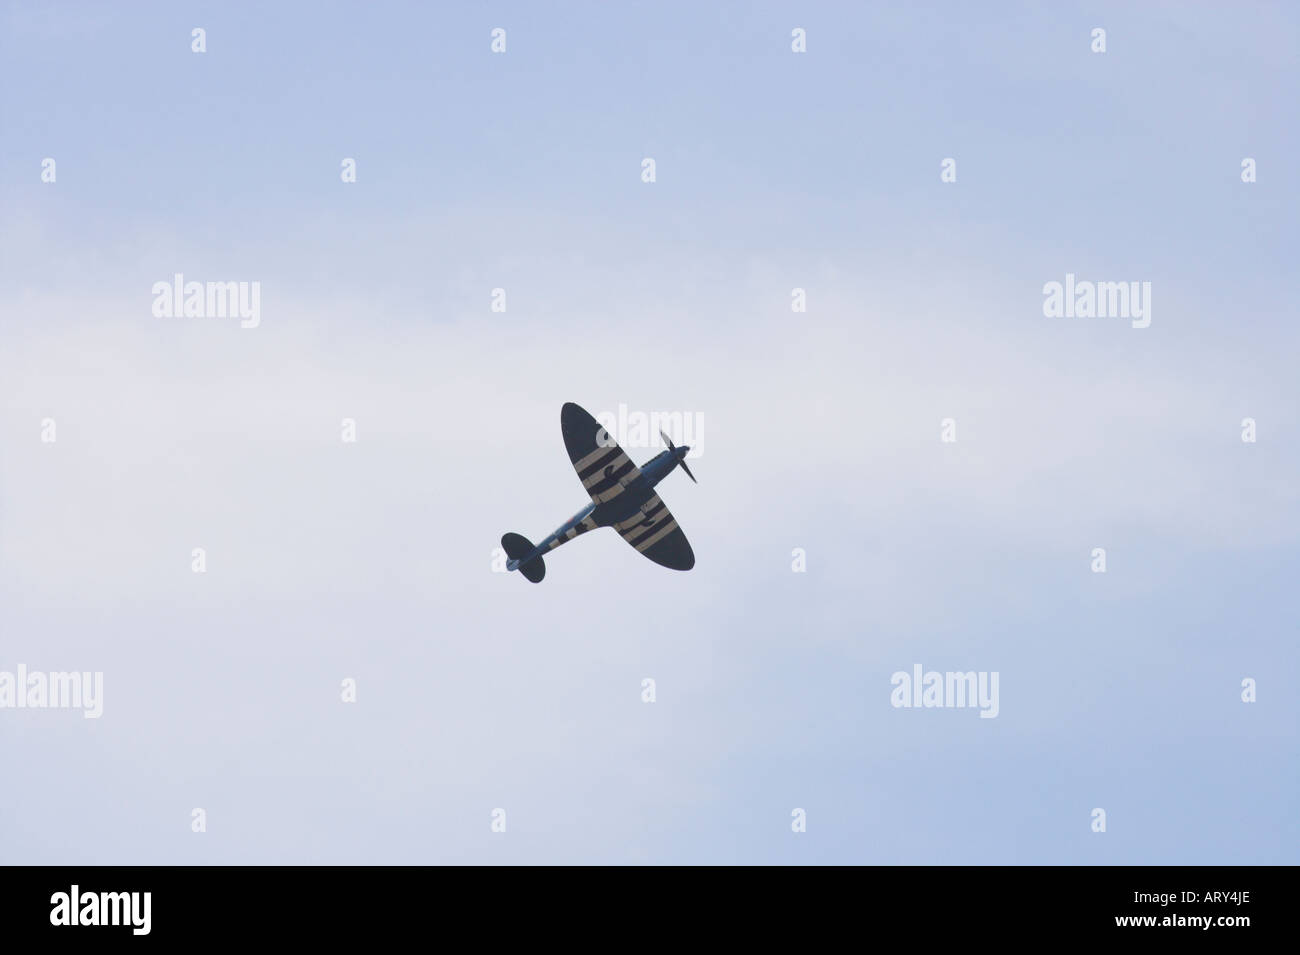 Spitfire PR Mk XIX climbing and showing underside in a cloudy blue sky Stock Photo